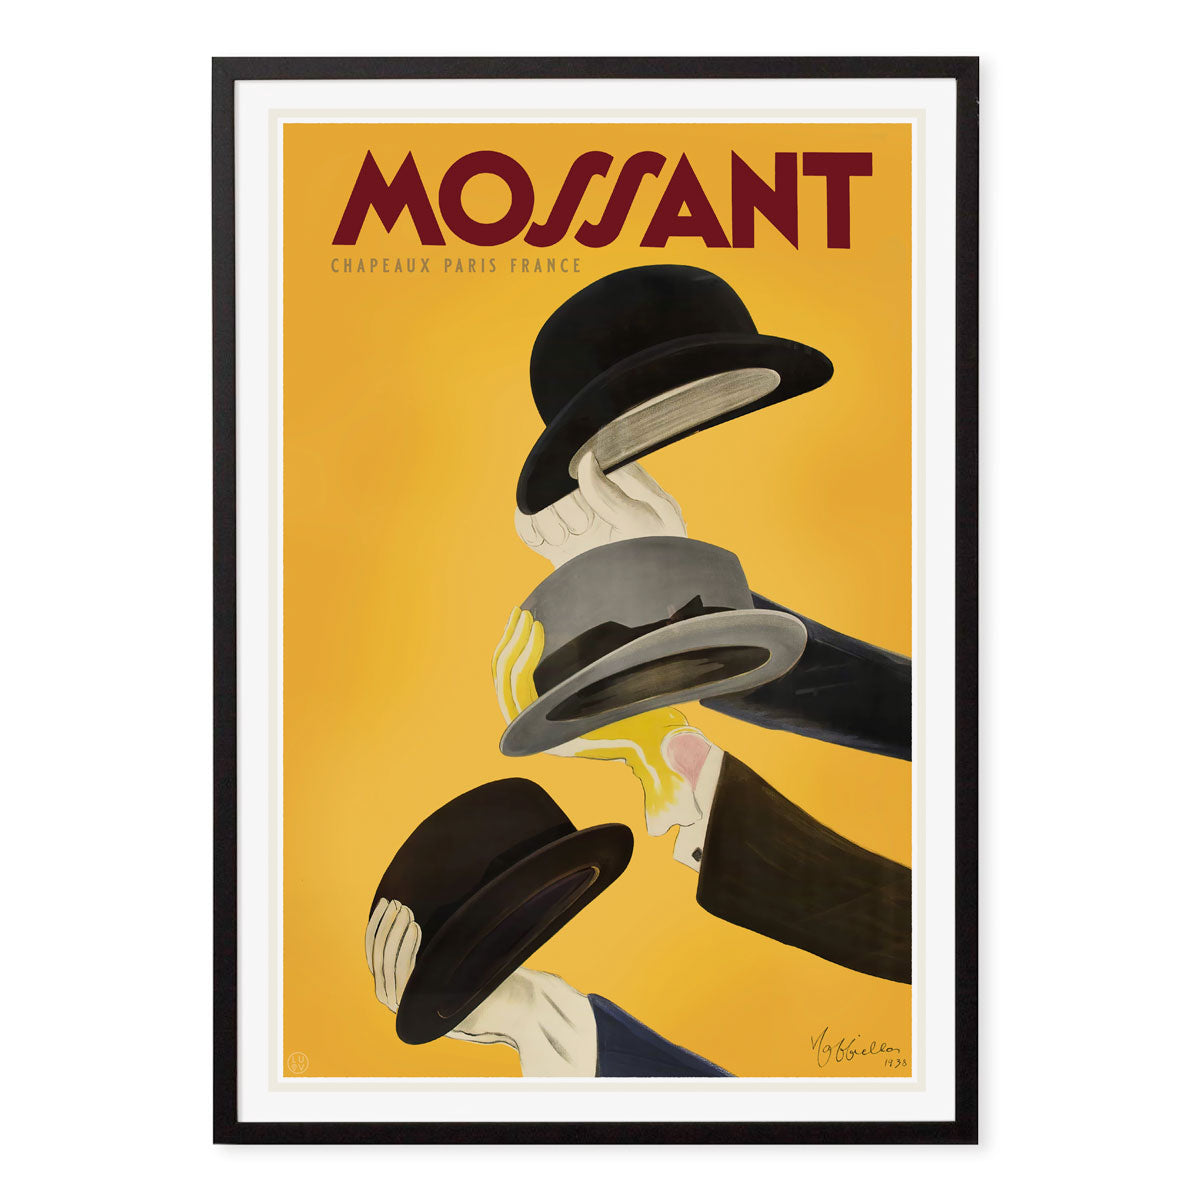 Mossant hats France vintage retro advertising poster in black frame from Places We Luv